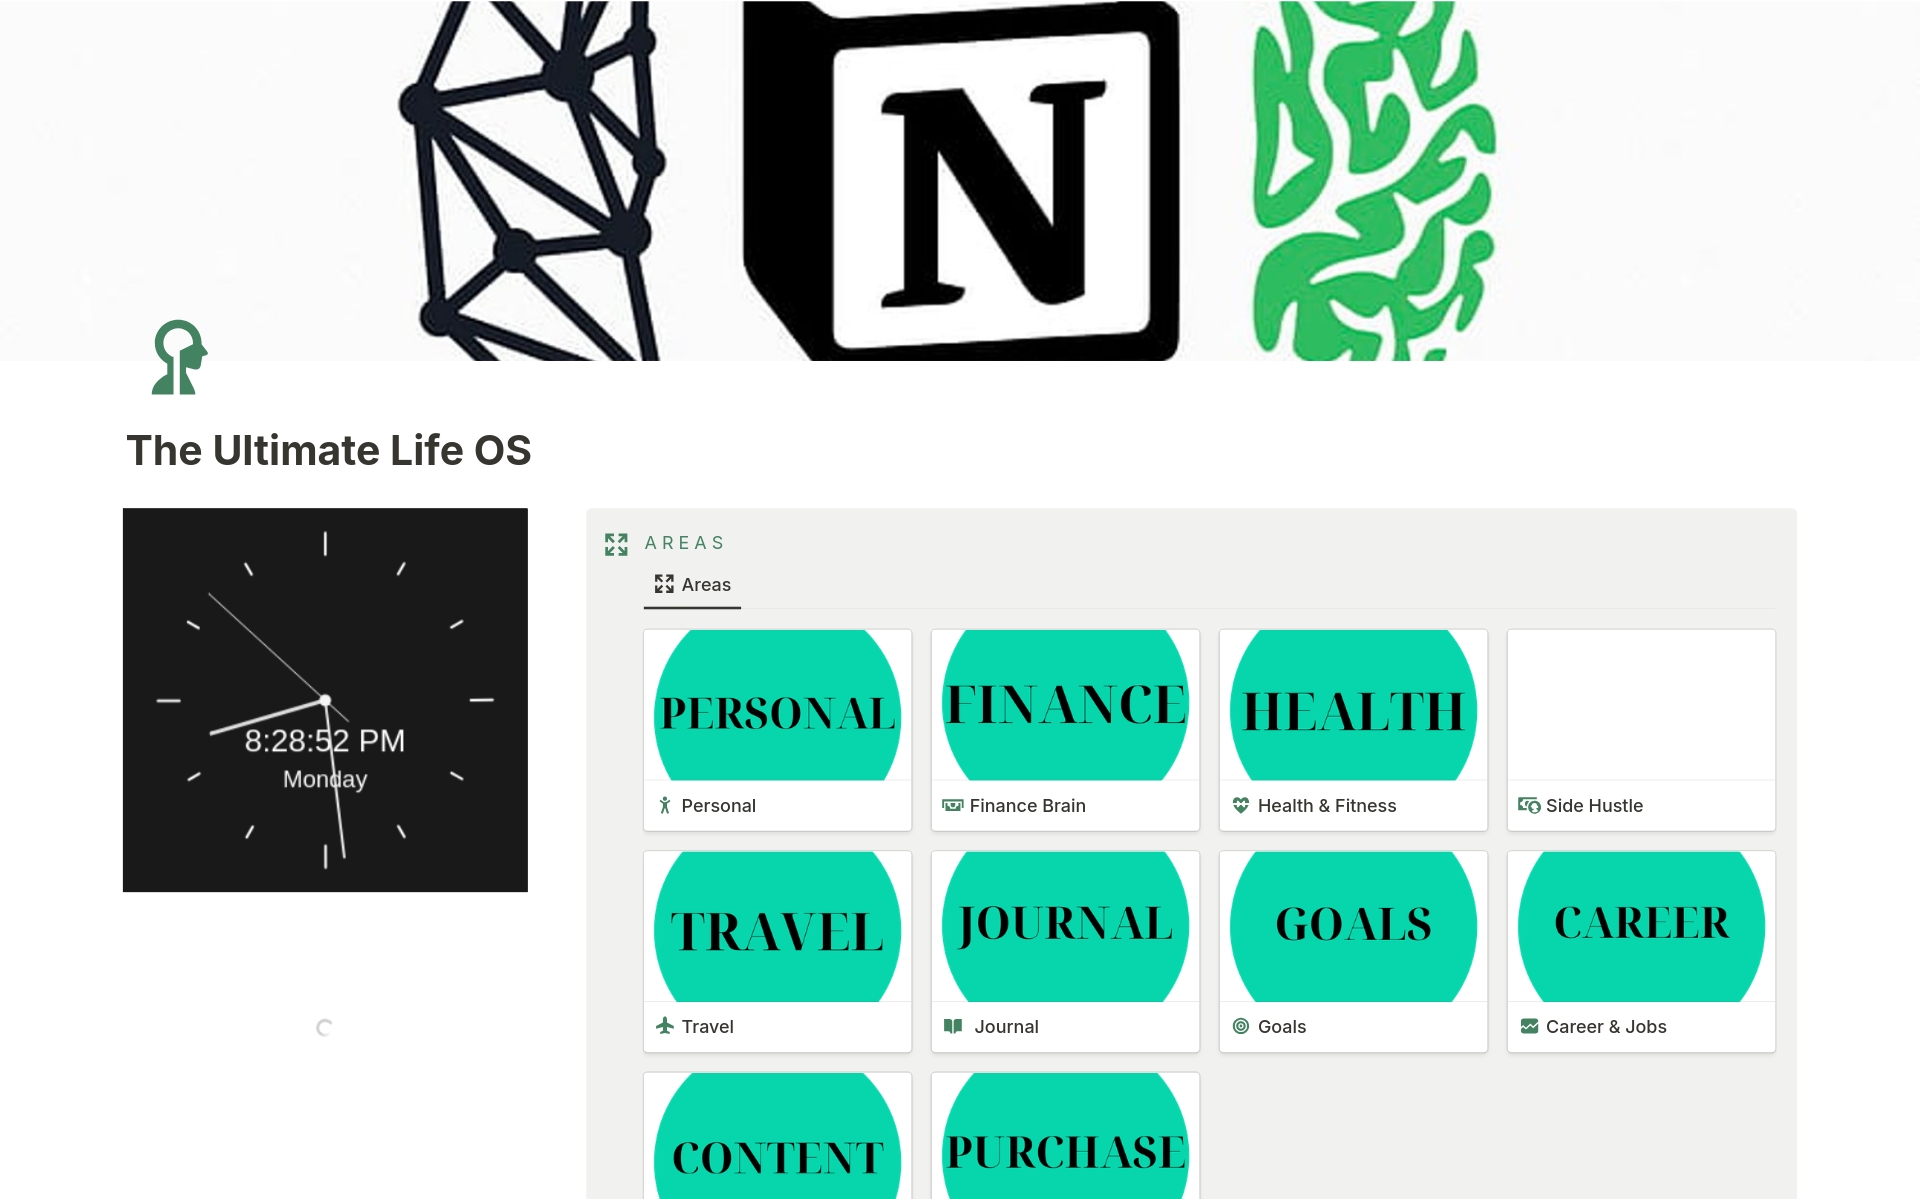 Organize your life with the Ultimate Life Notion Templates. Manage tasks and projects, track finances, monitor health, manage side hustles, set goals, and track your career—all in one workspace. Stay organized and focused on what matters most.